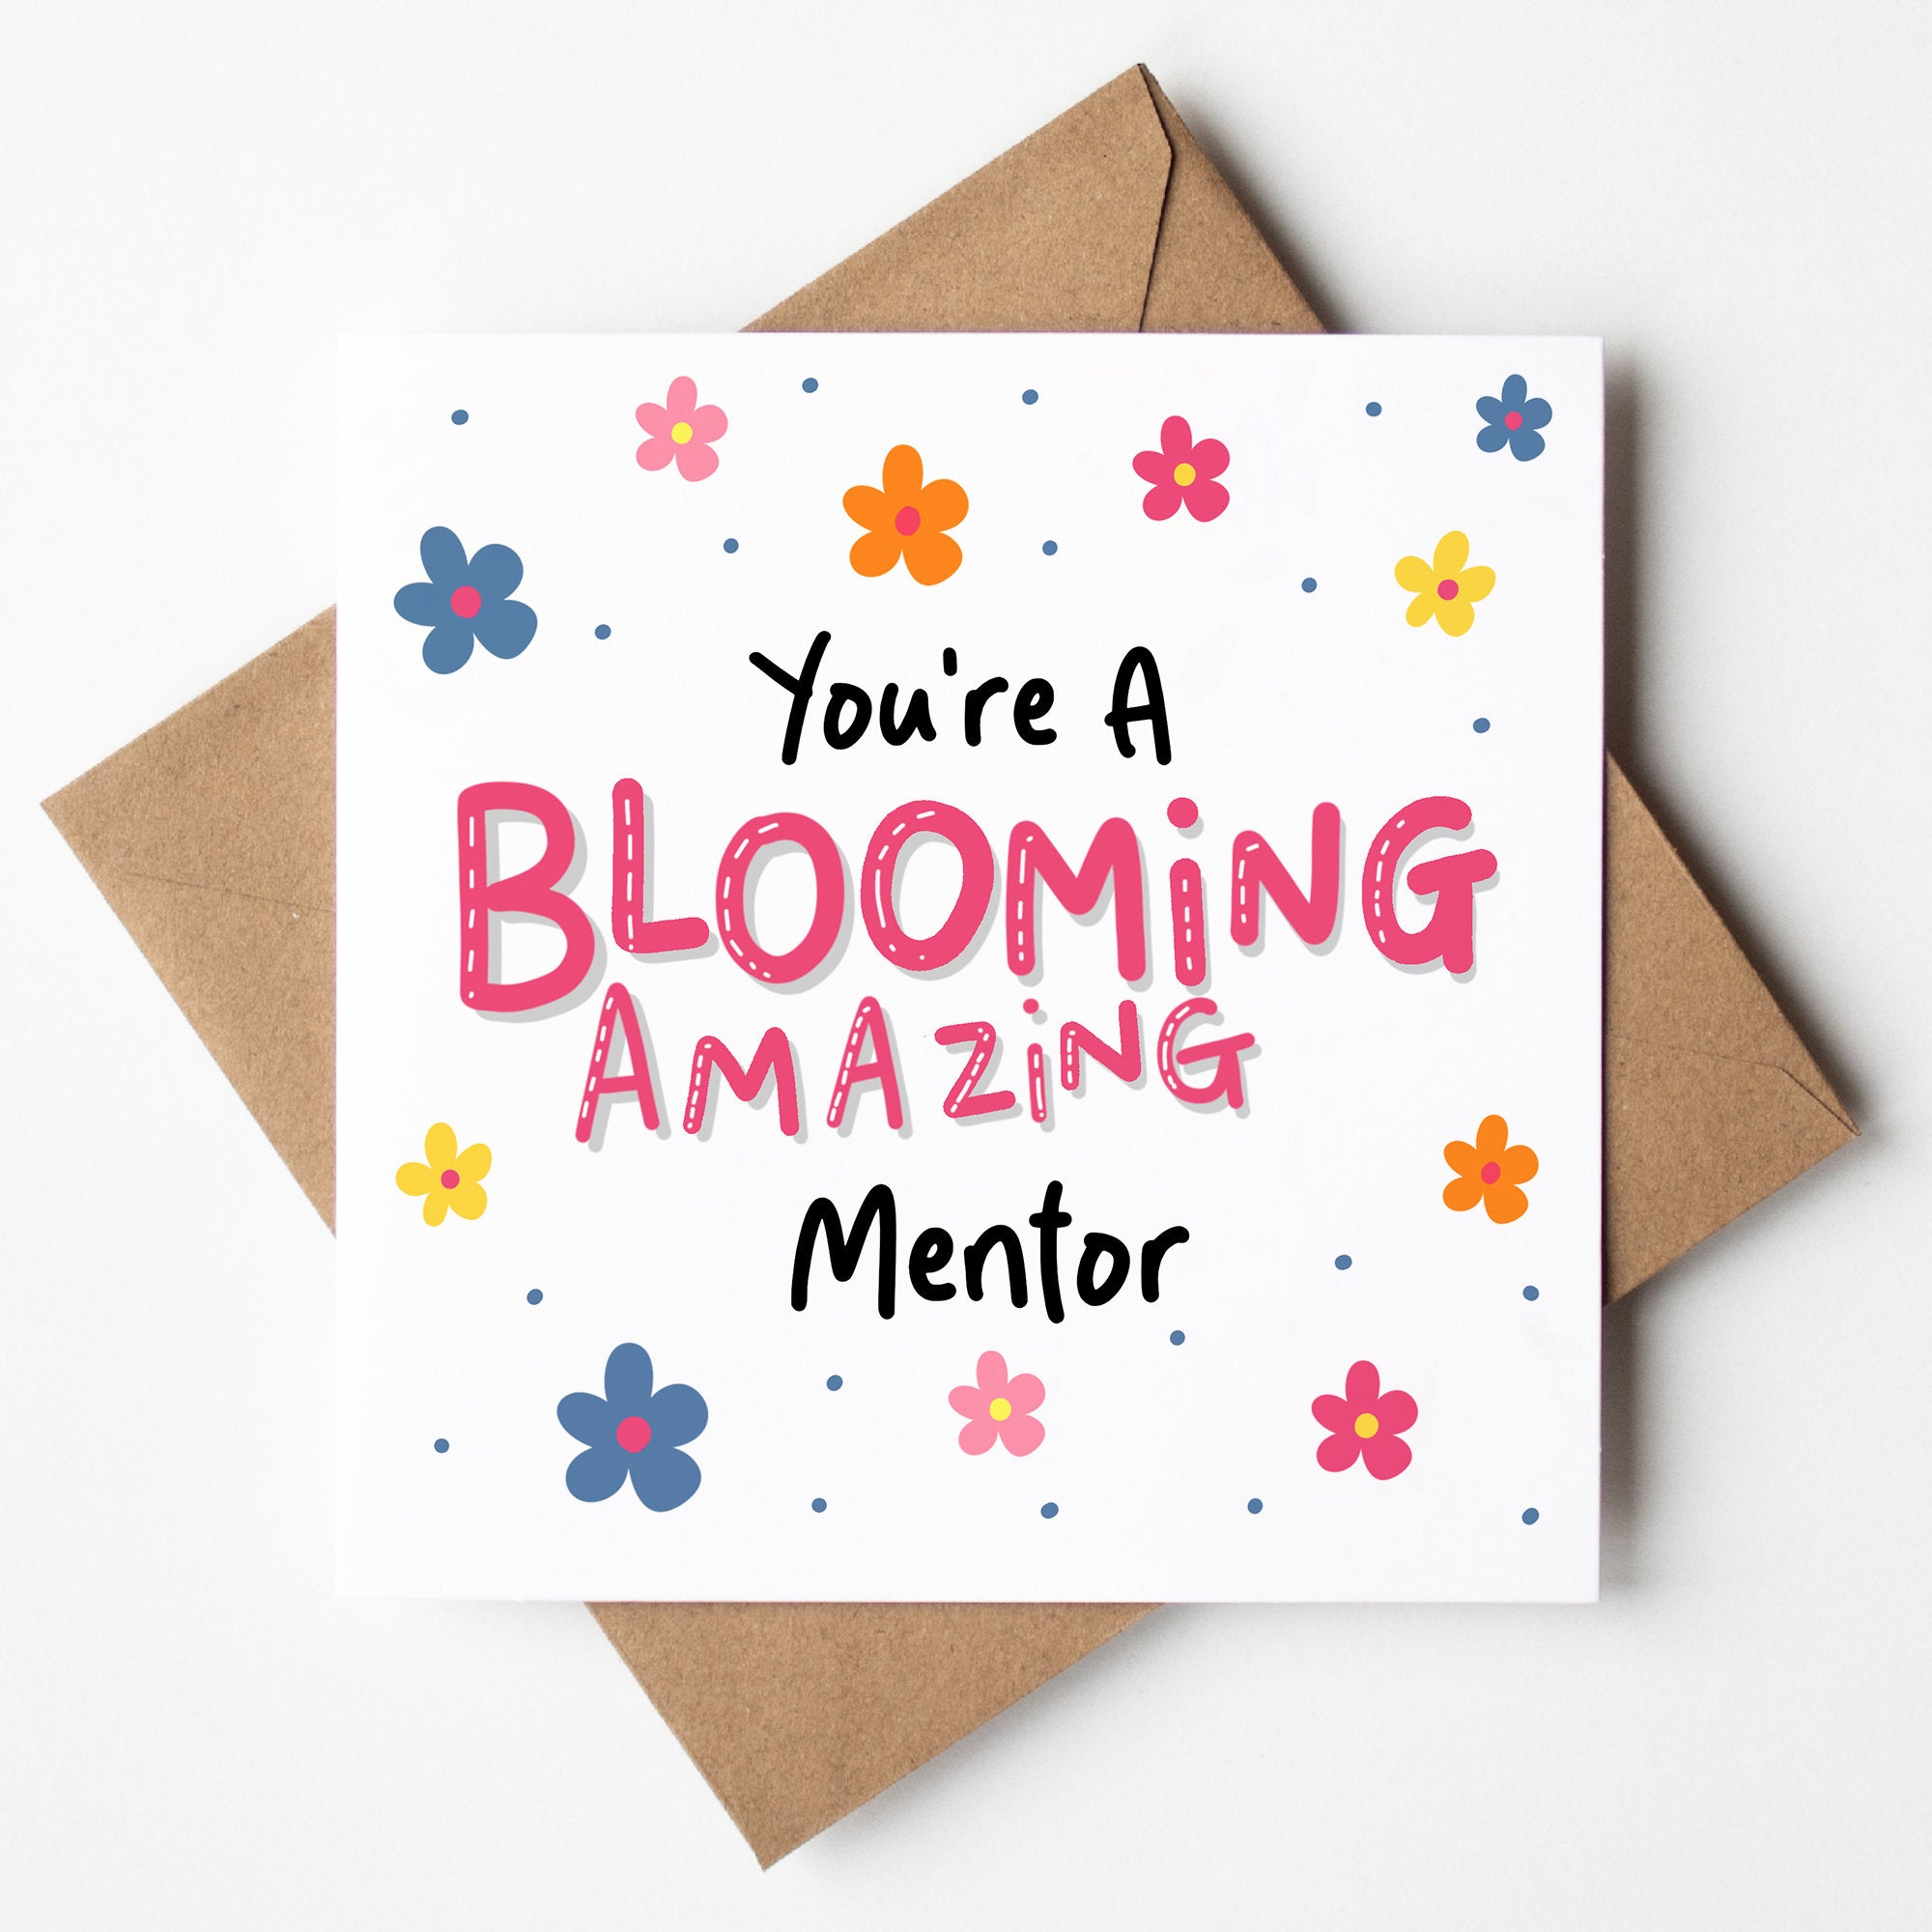 You're A Blooming Amazing Mentor, Cute Card, Blooming Amazing, Mentor Thank You Card, Card For Mentor, From Mentee